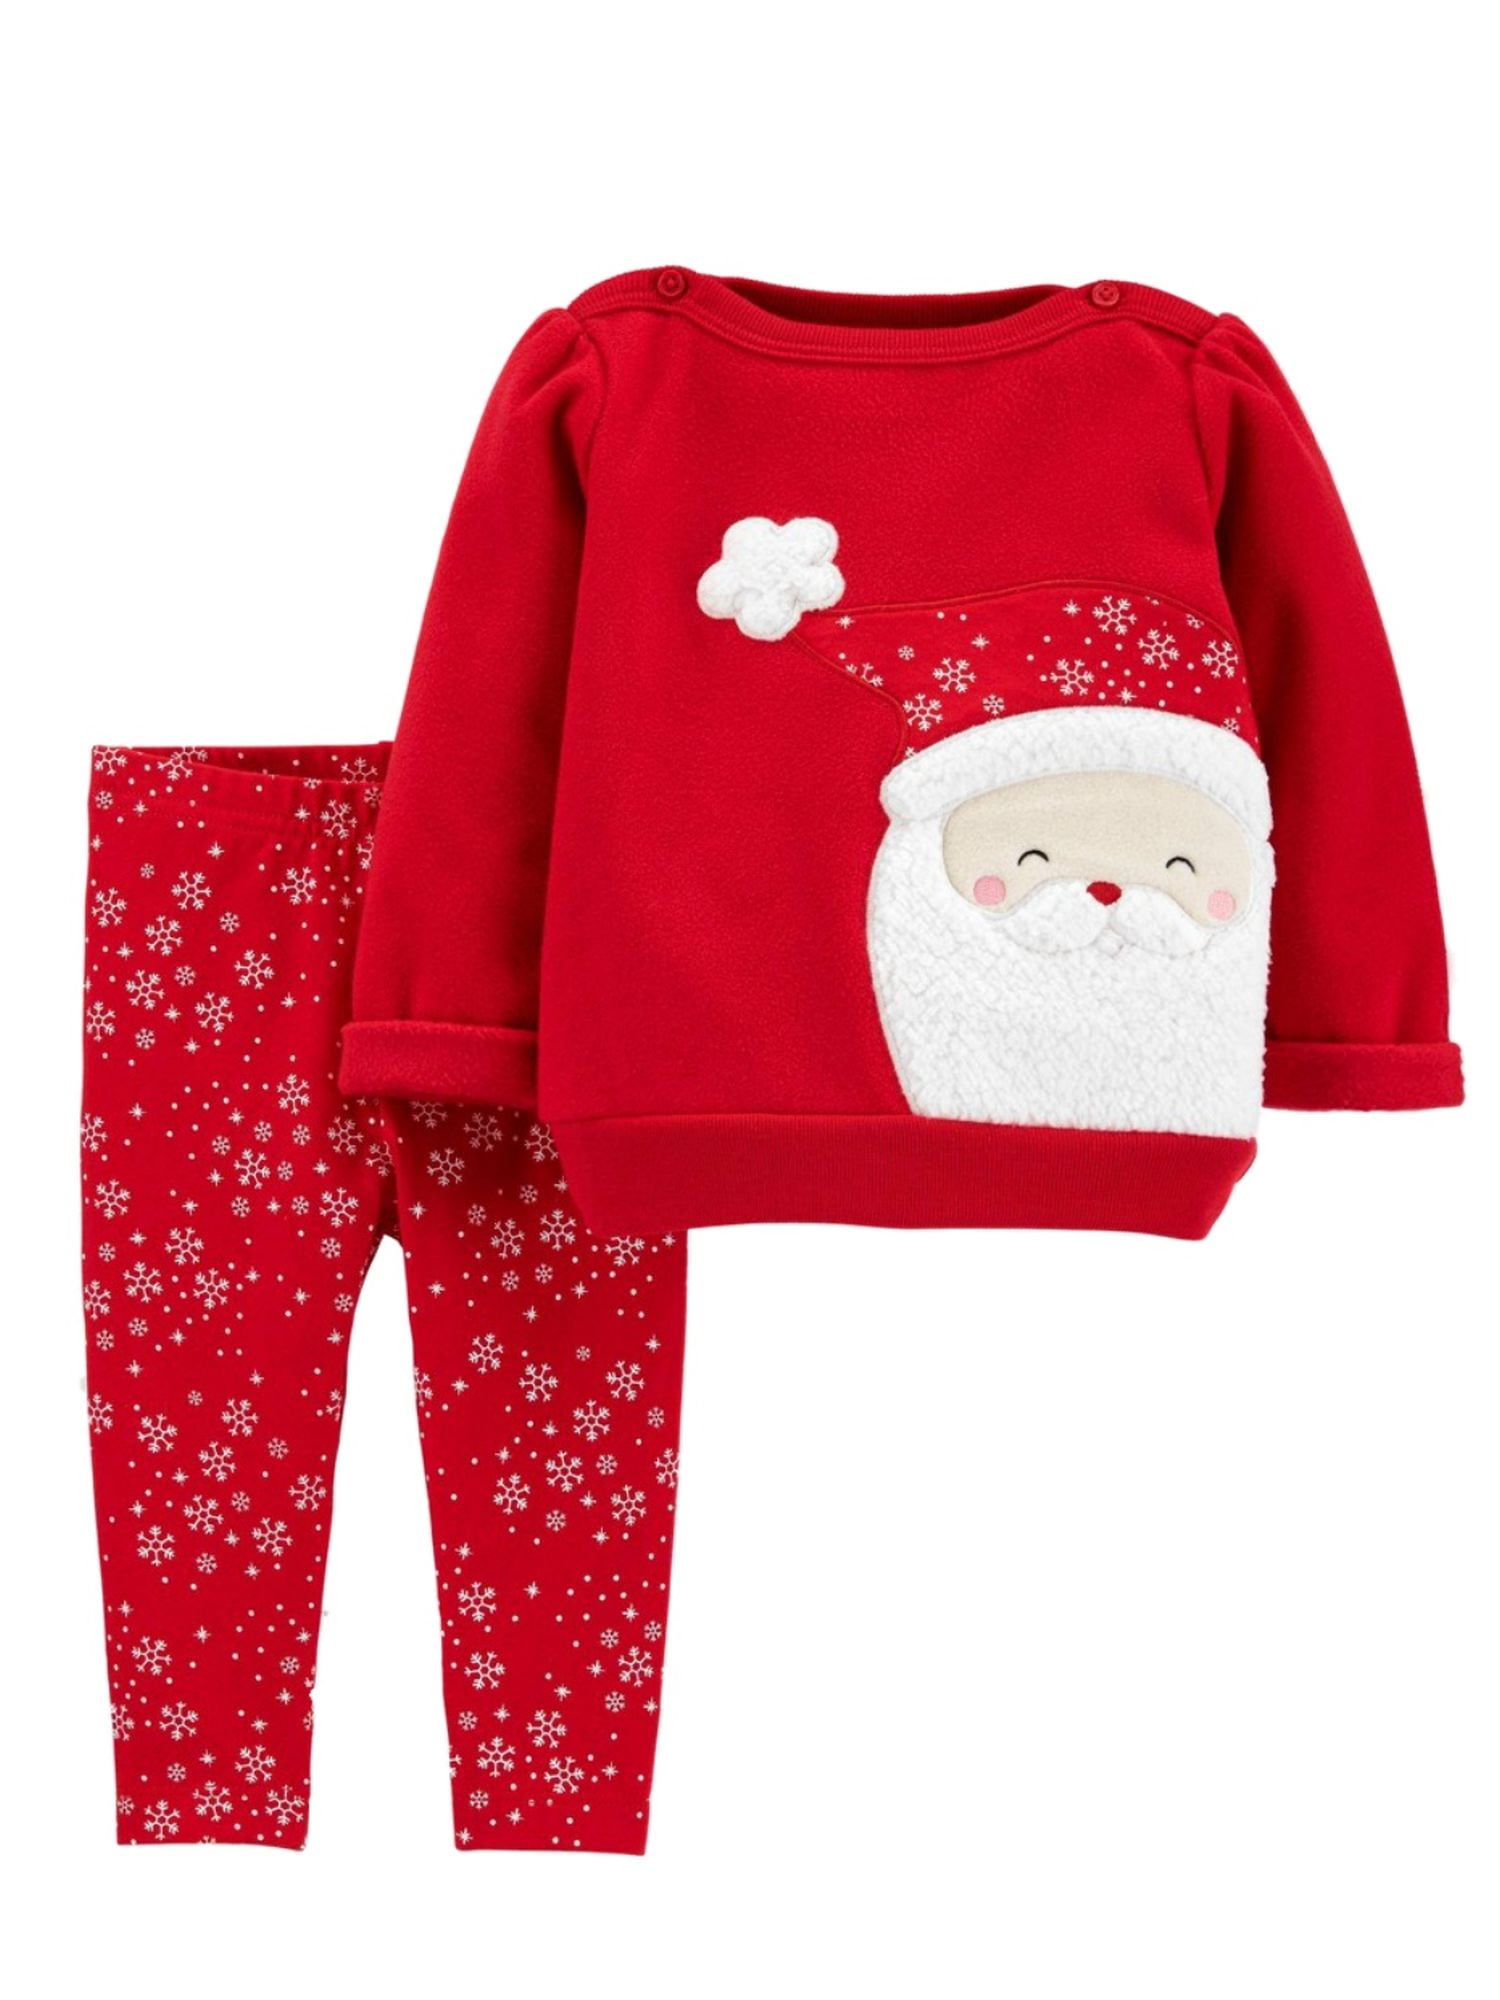 NEW Girl's Christmas Tutu Santa Reindeer Holiday Party 2 PC Leggings Outfit Set 